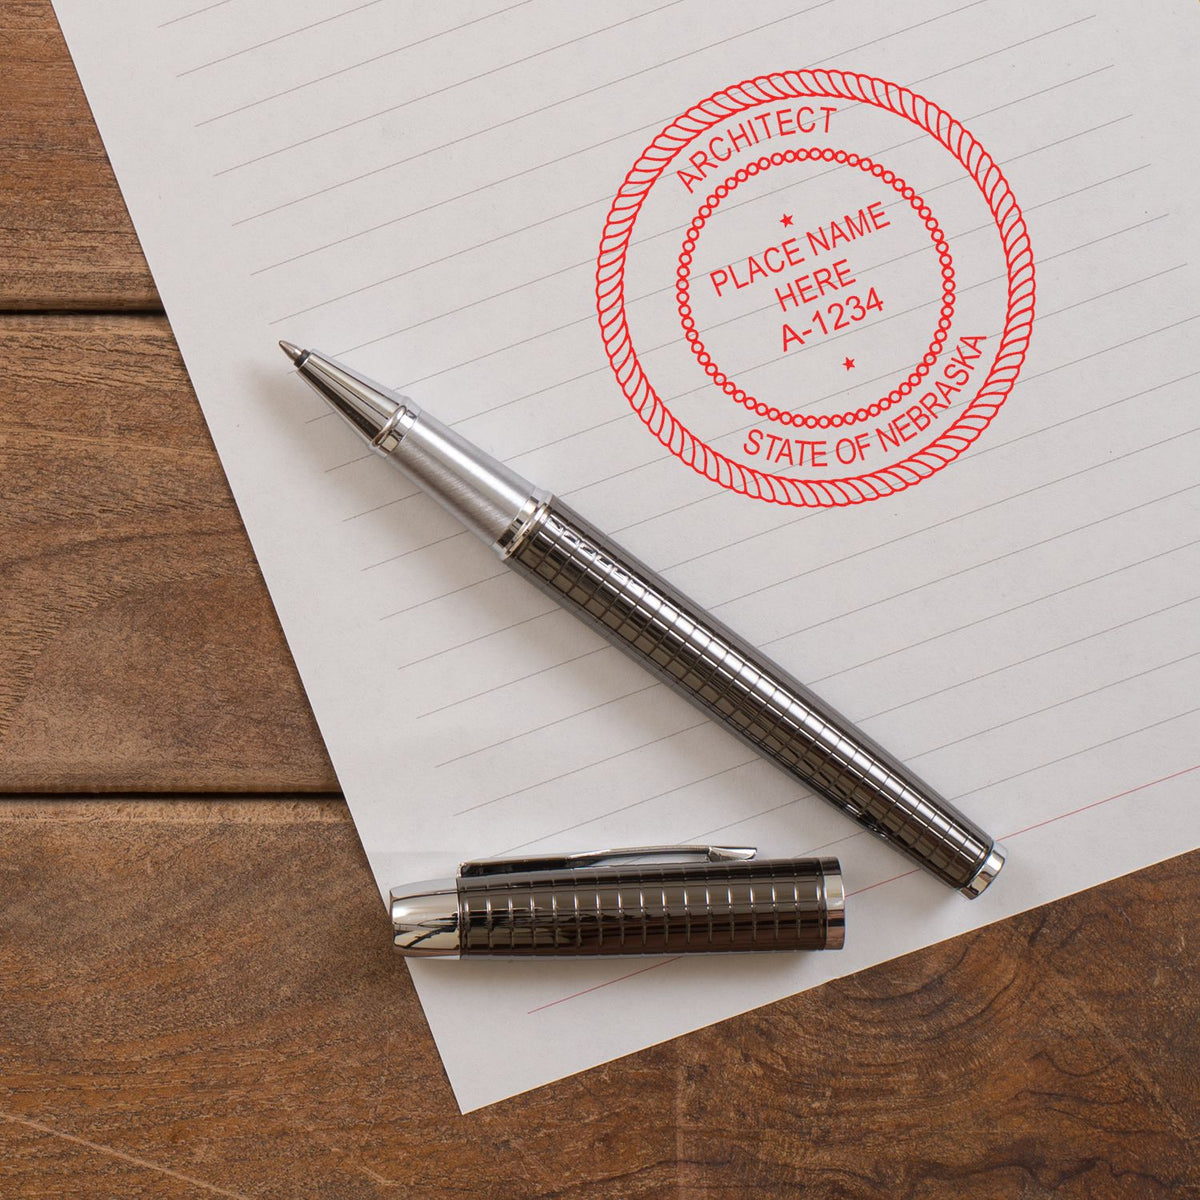 The Slim Pre-Inked Nebraska Architect Seal Stamp stamp impression comes to life with a crisp, detailed photo on paper - showcasing true professional quality.